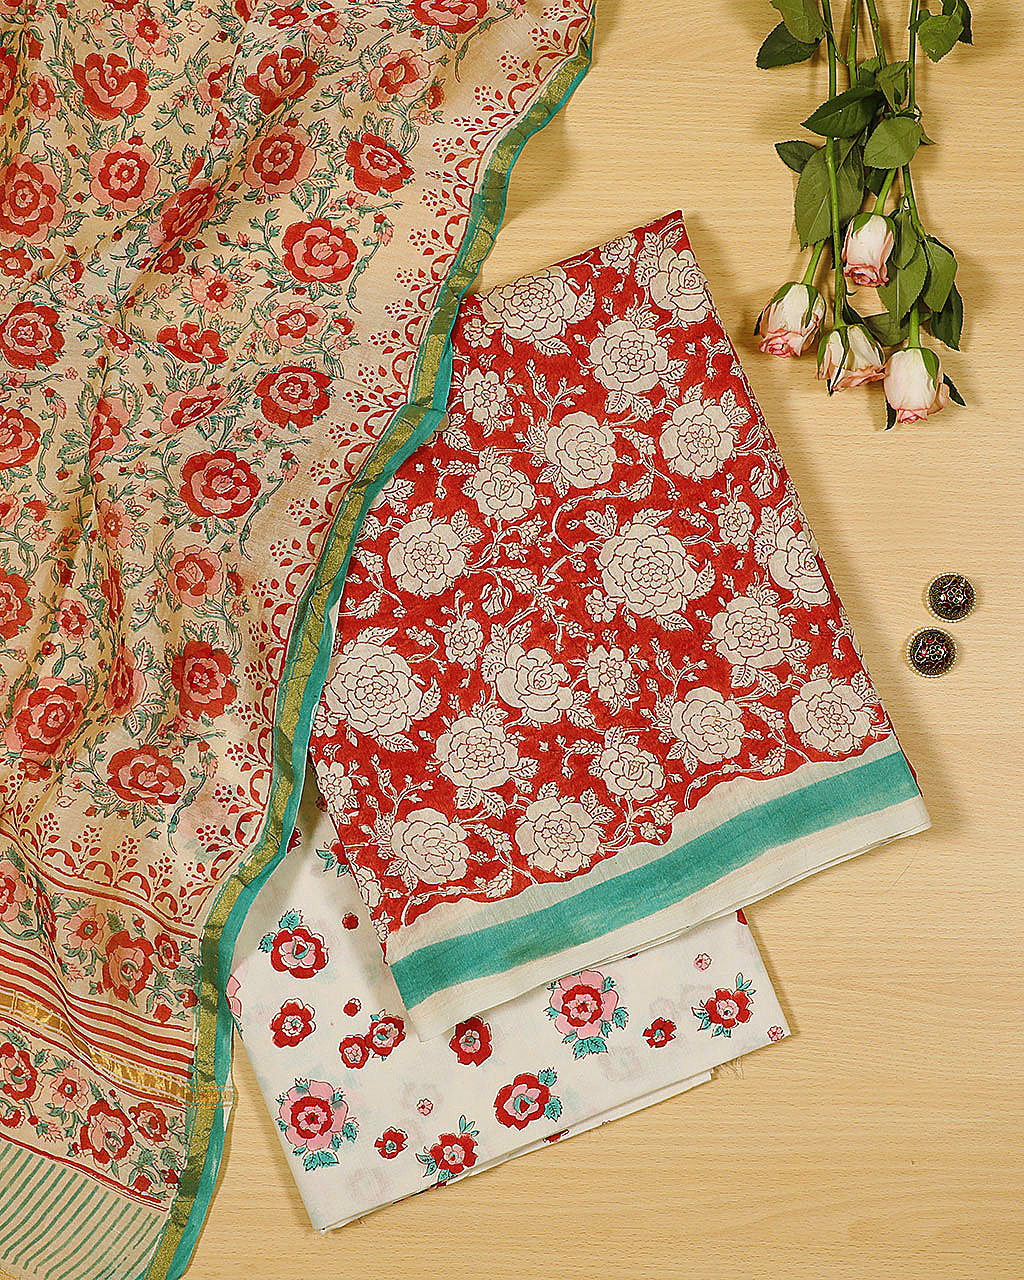 Authentic Red & Turquoise hand block printed chanderi suit with chanderi dupatta